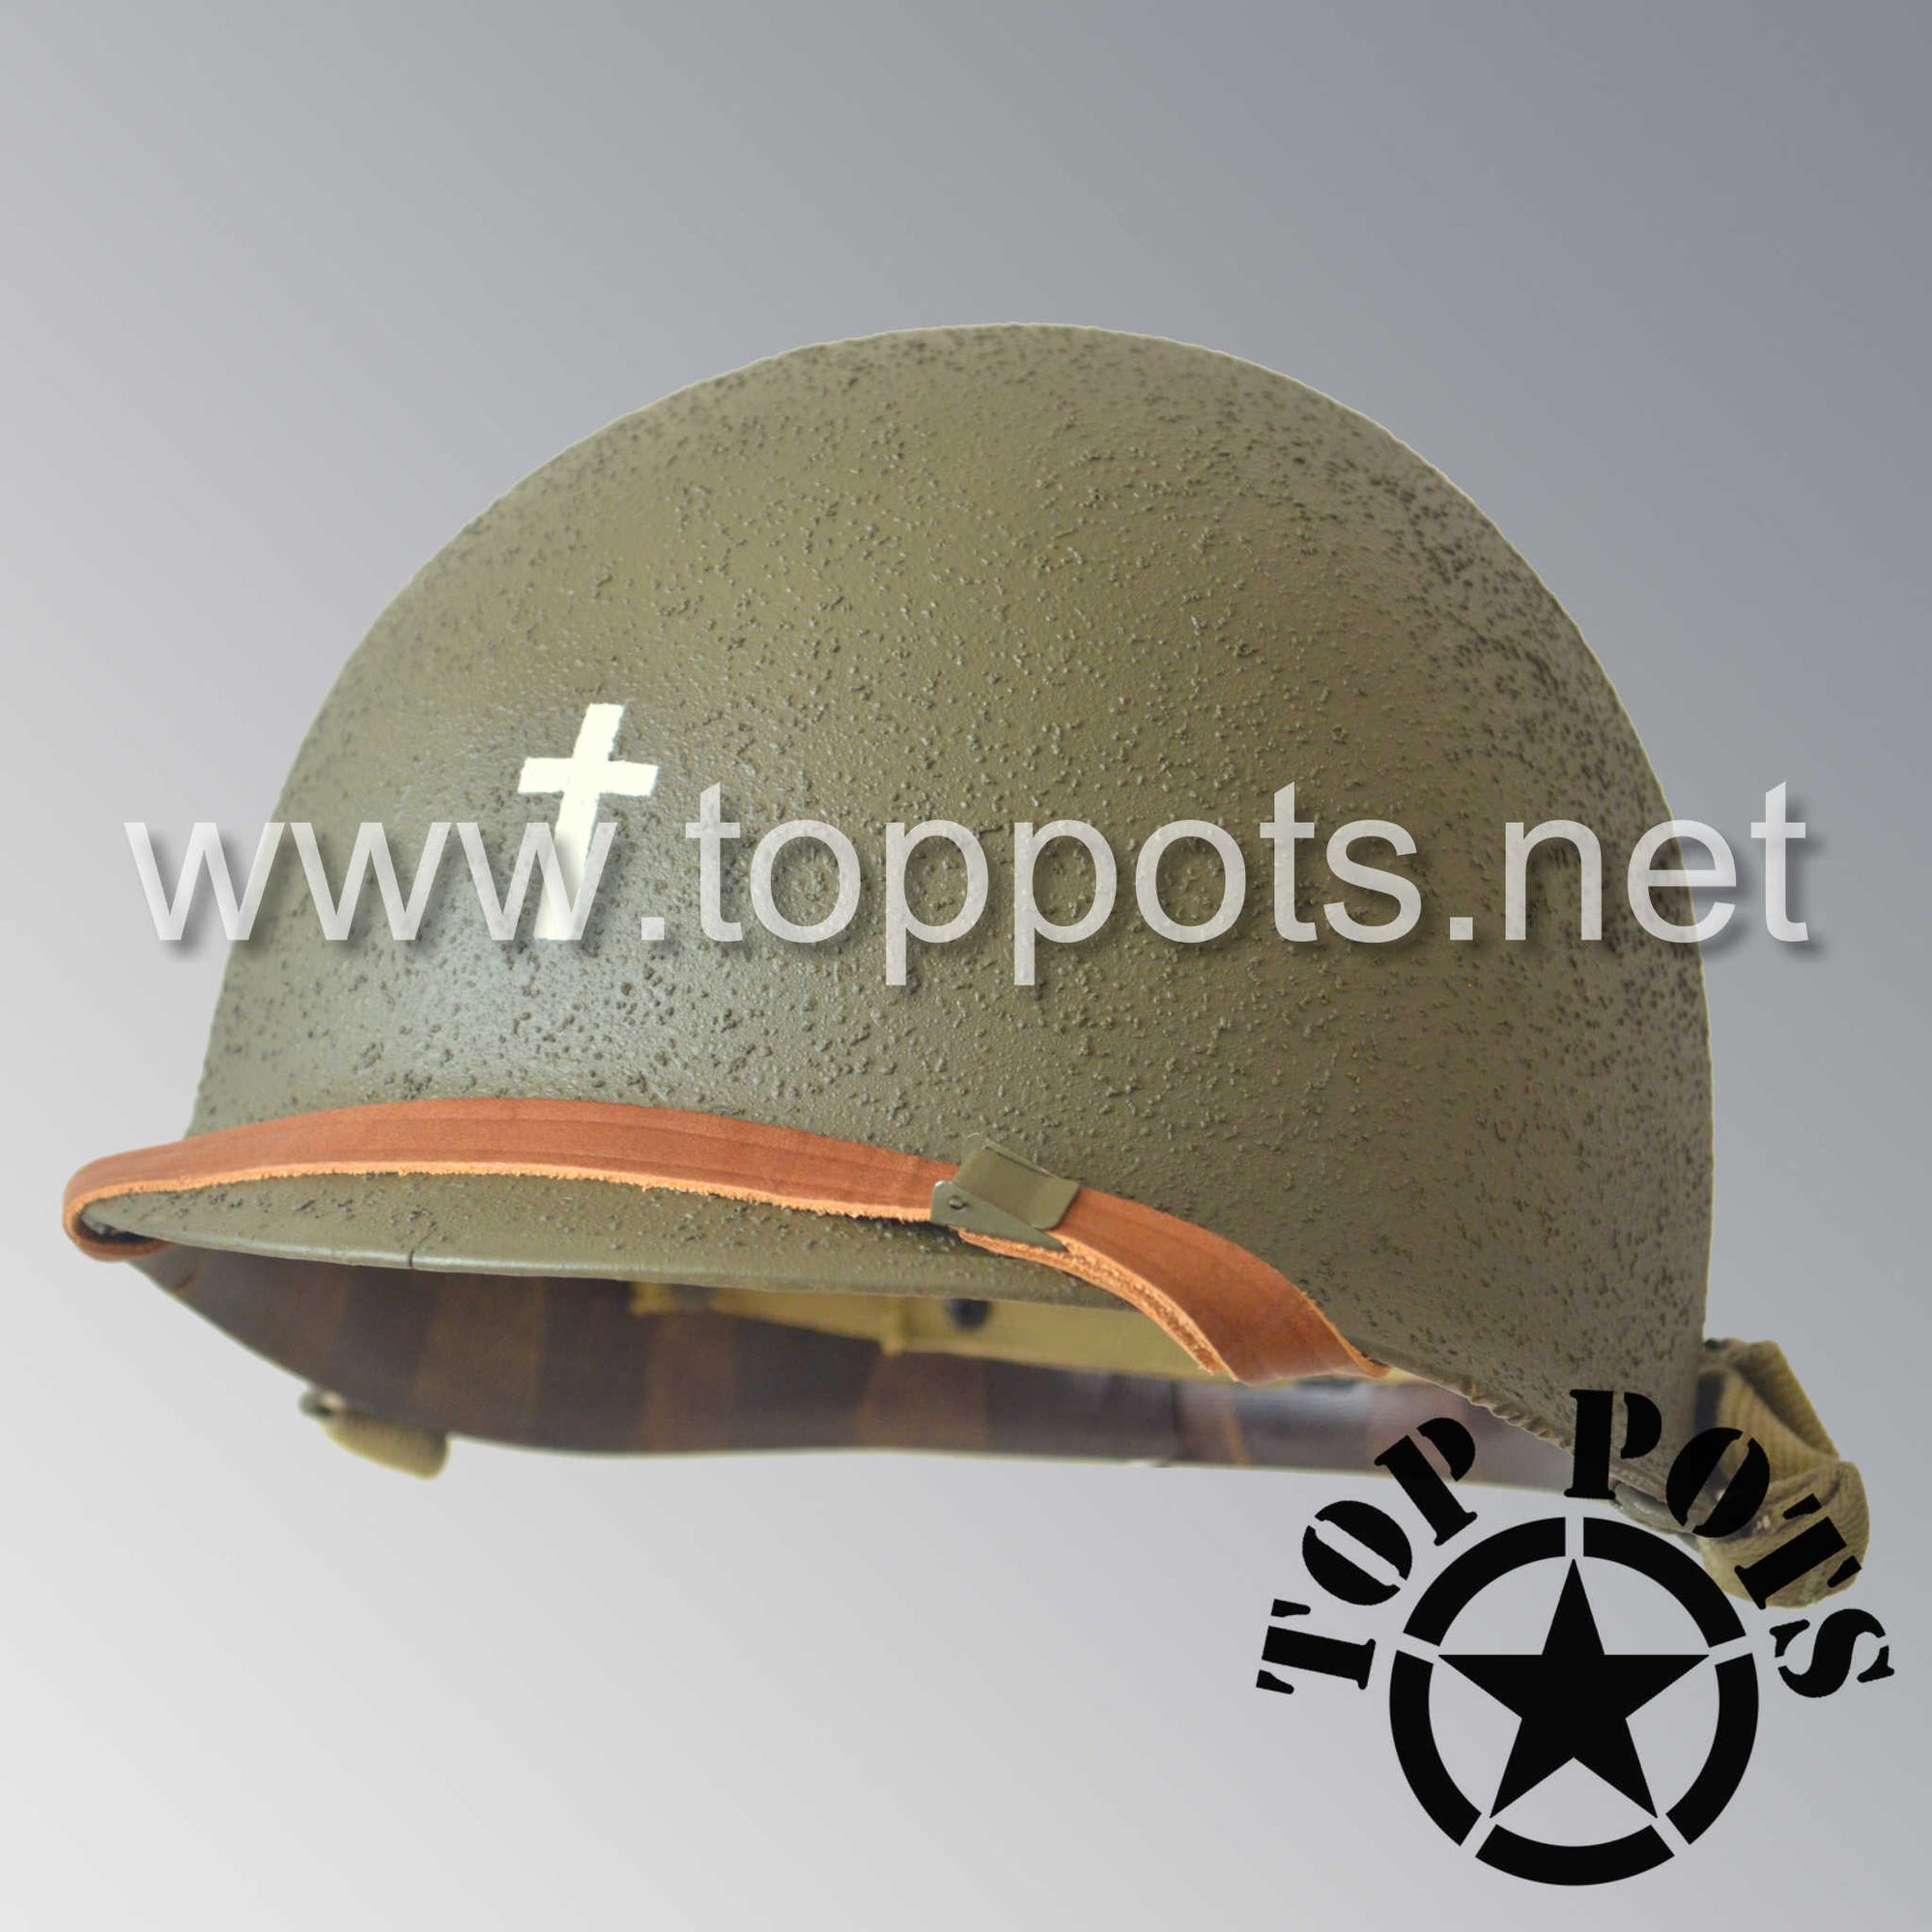 WWII US Army Restored Original M1 Infantry Helmet Swivel Bale Shell and Liner with Chaplain Officer Emblem